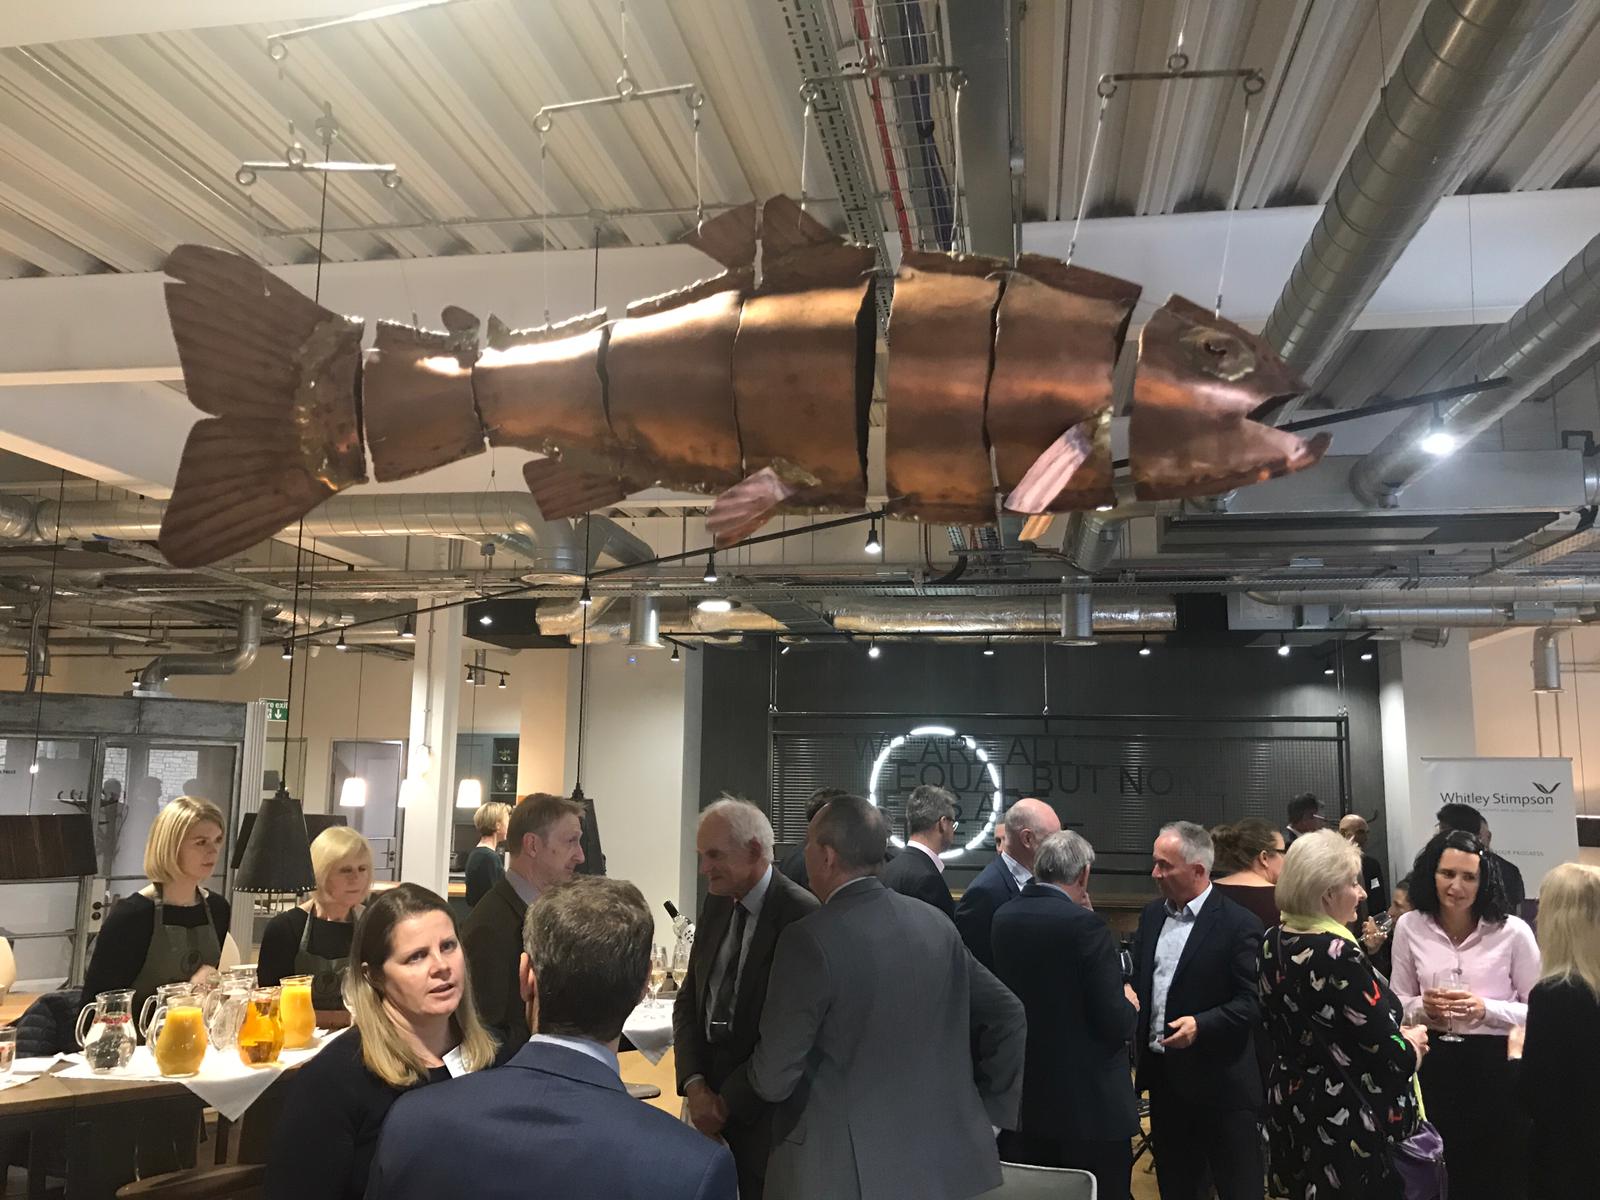 Whitley Stimpson hosts networking evening in Bicester